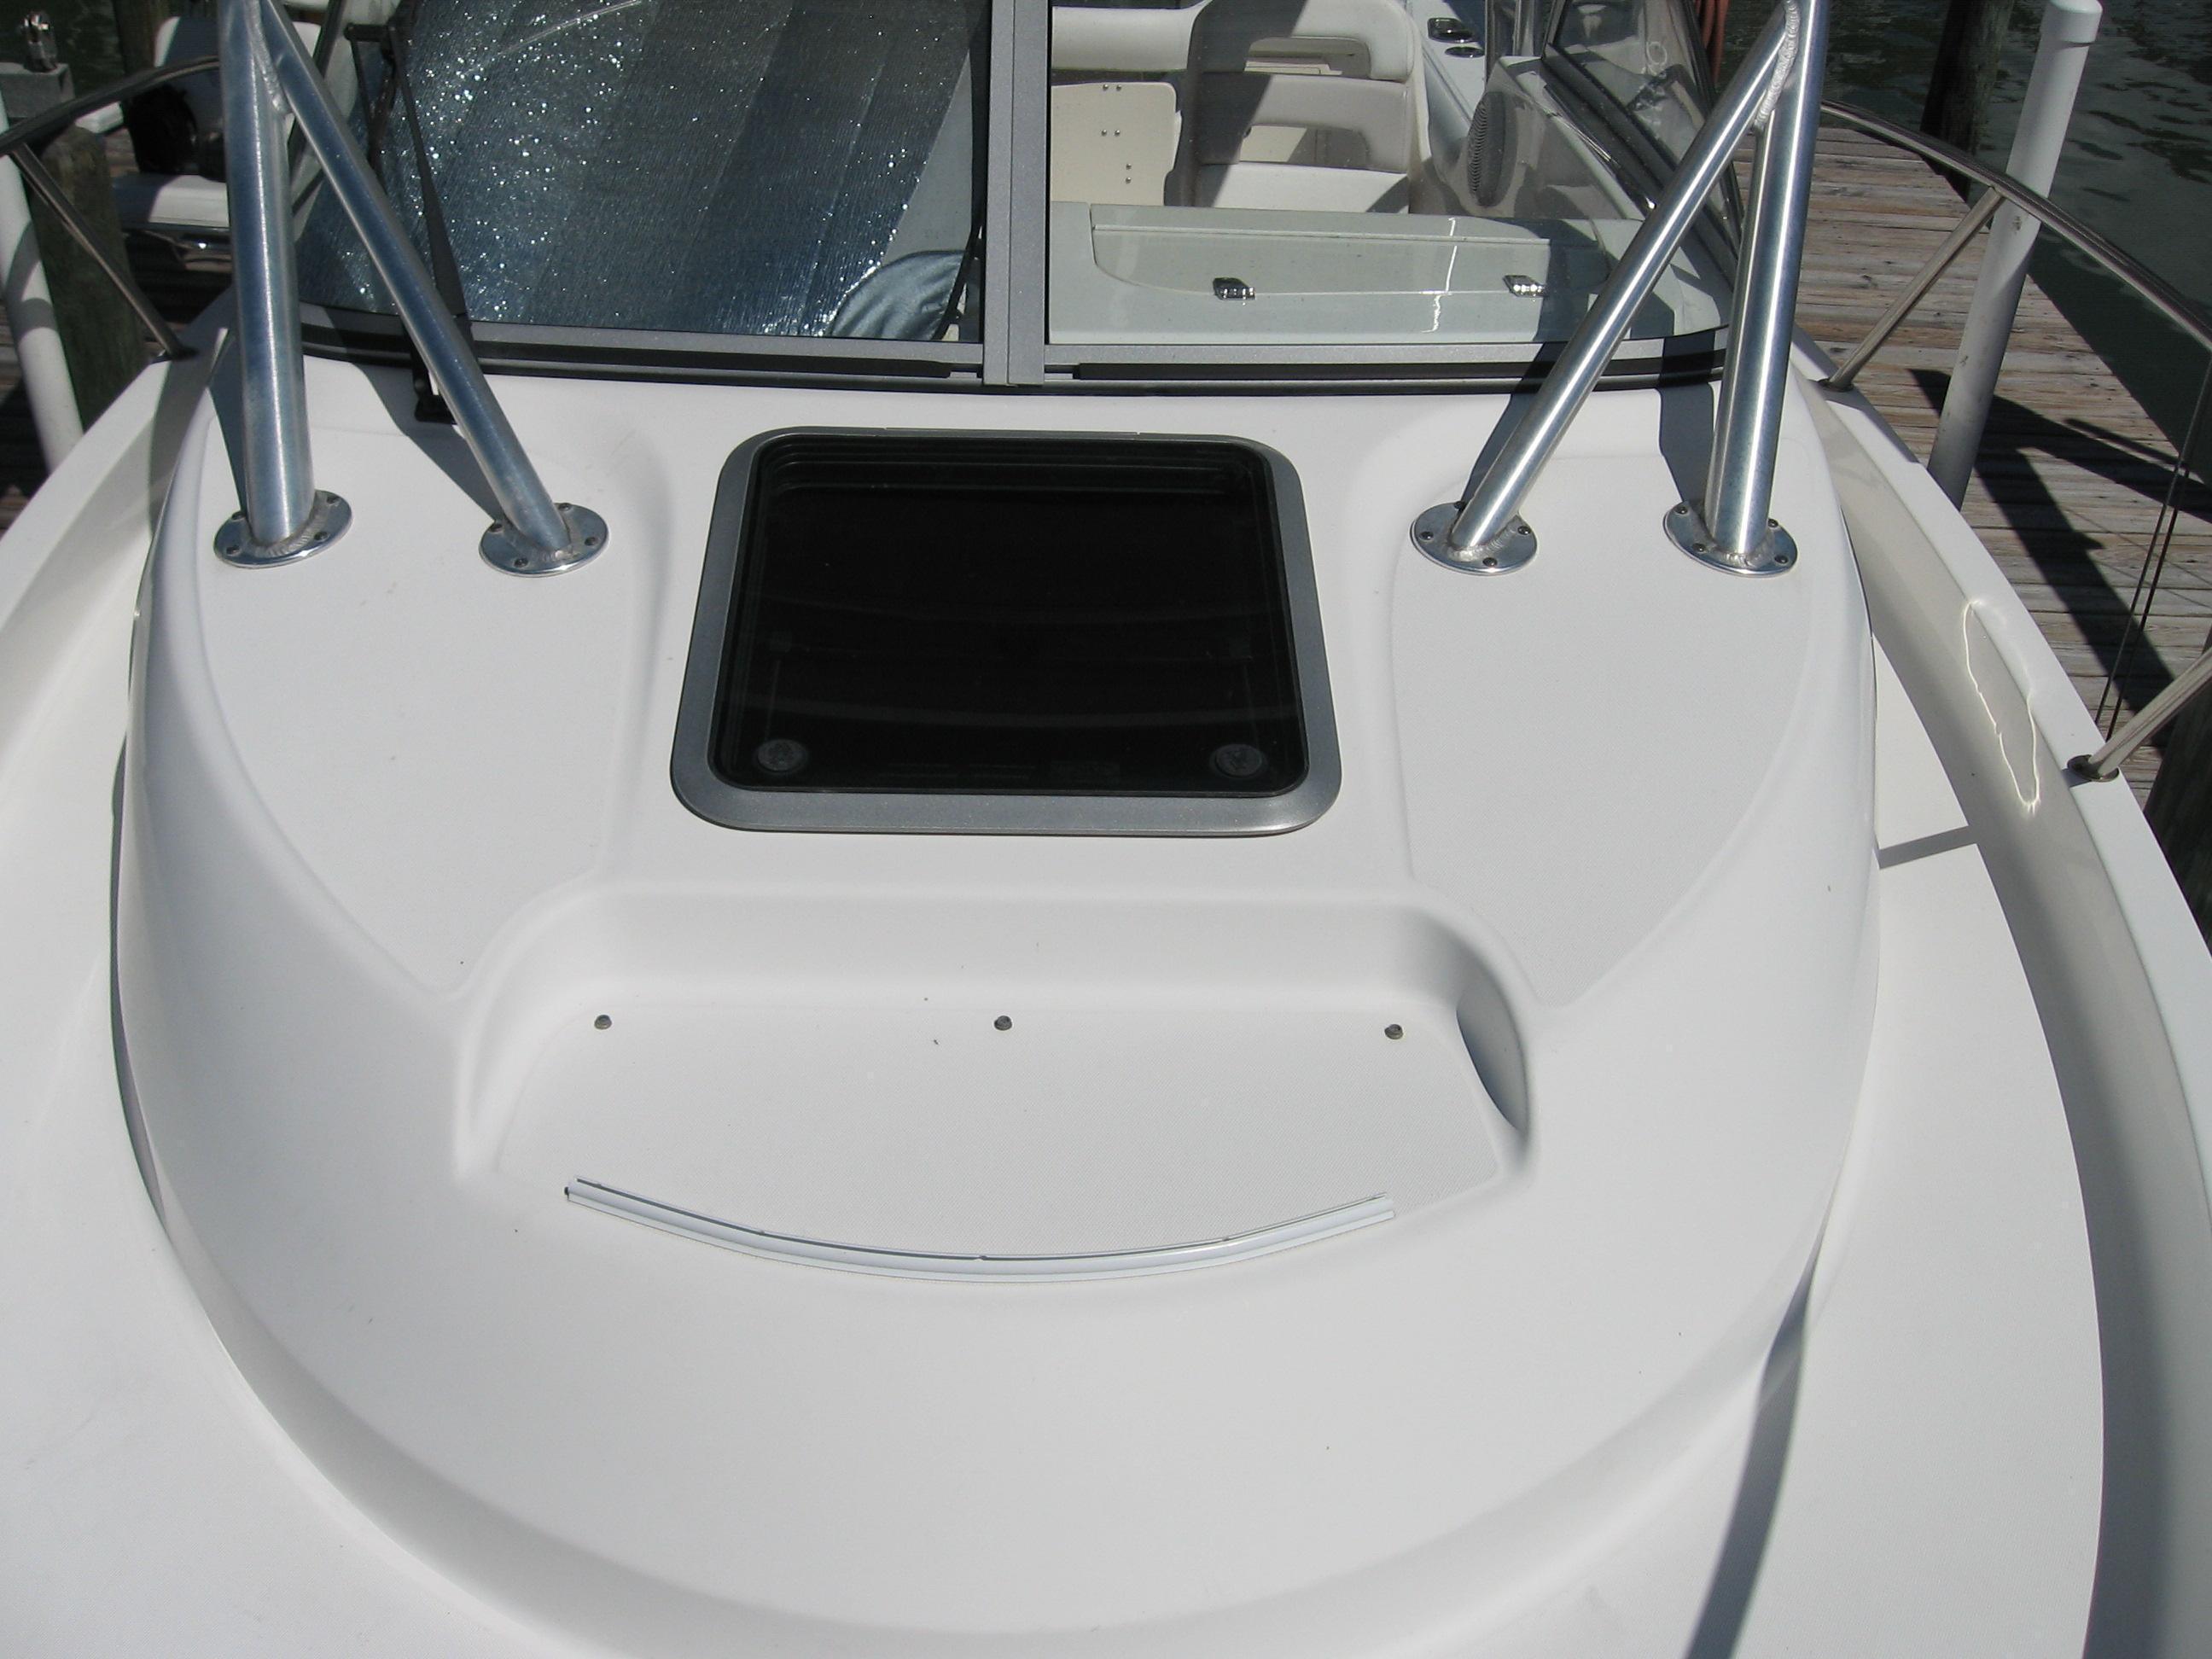 Boston Whaler Conquest 235, Clearwater